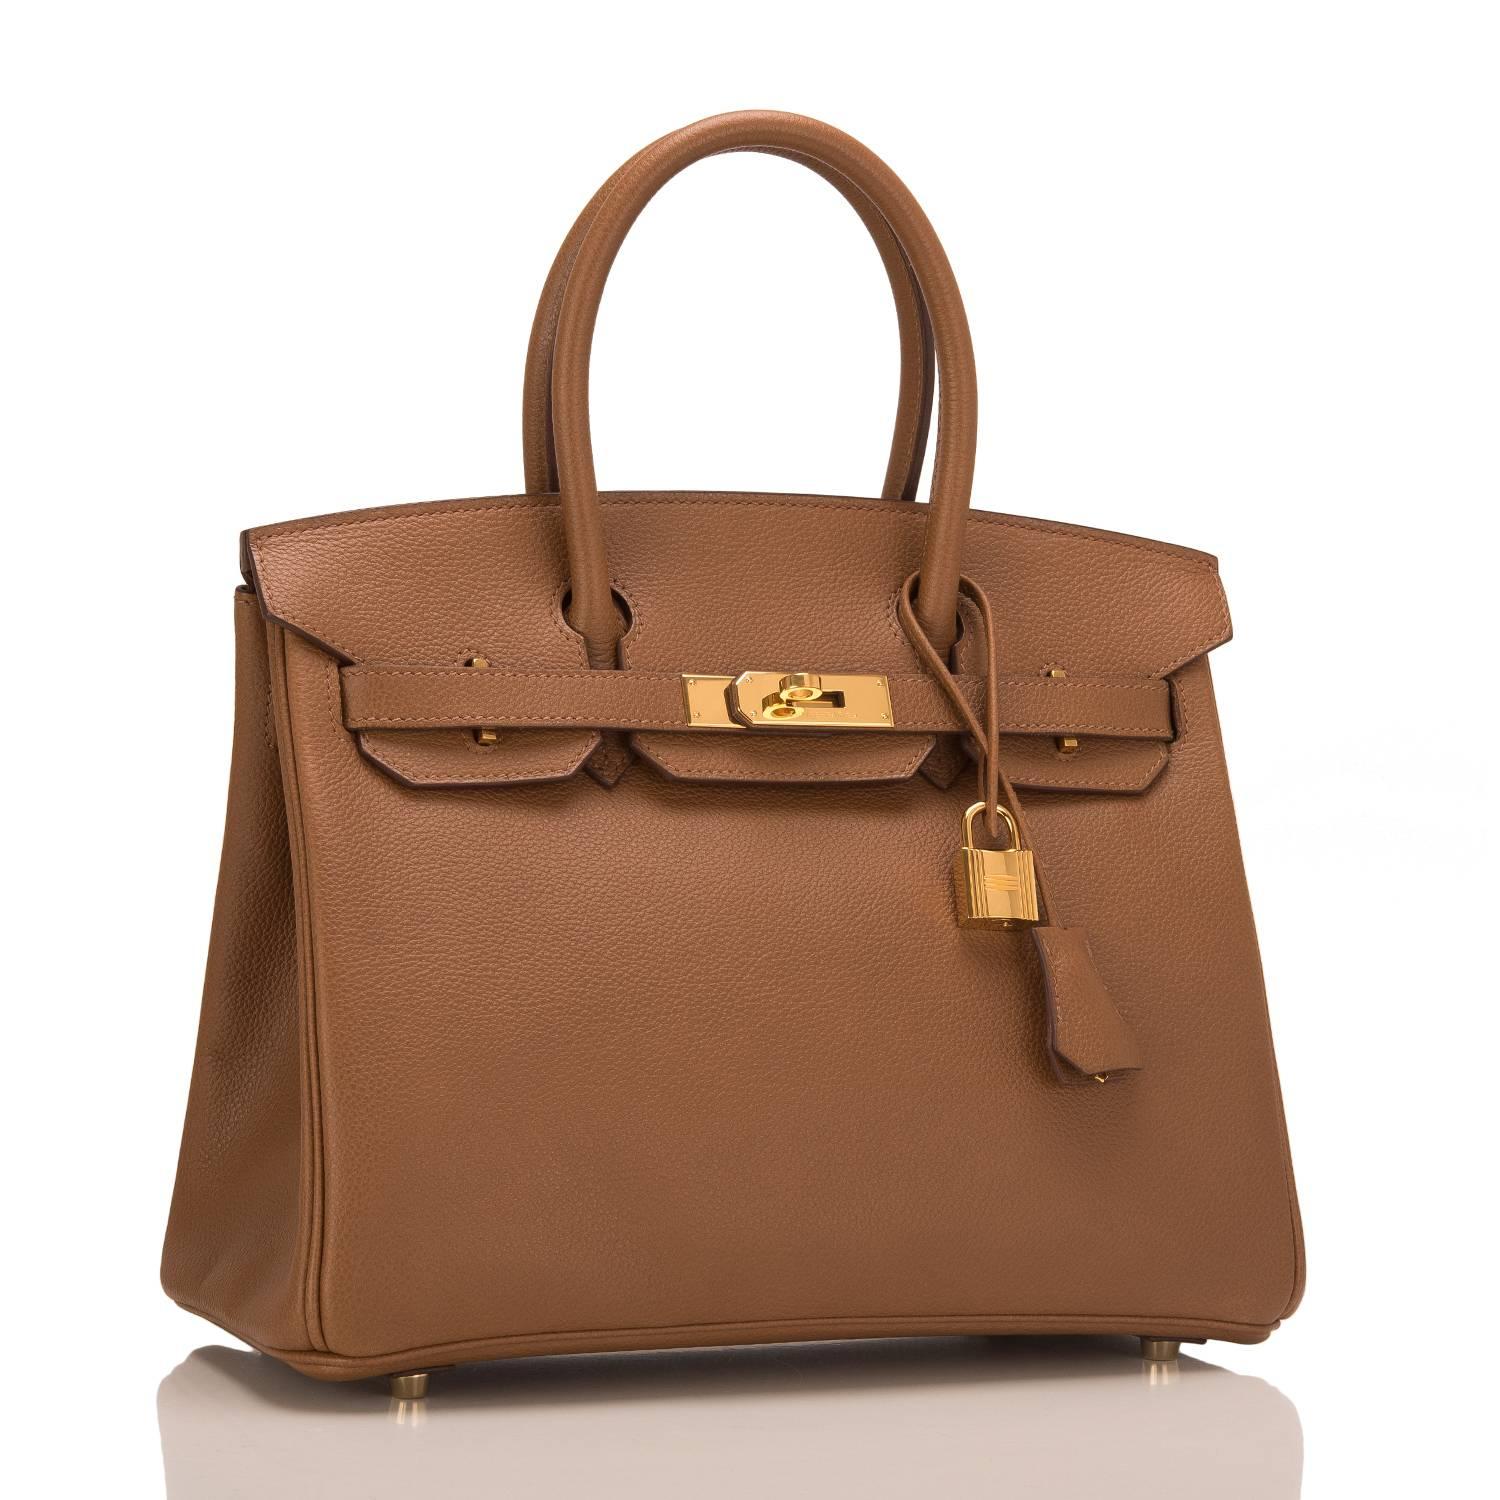 Hermes Alezan Birkin 30cm of Togo leather with gold hardware.

This Birkin has tonal stitching, a front toggle closure, a clochette with lock and two keys, and double rolled handles.

The interior is lined with Alezan chevre and has one zip